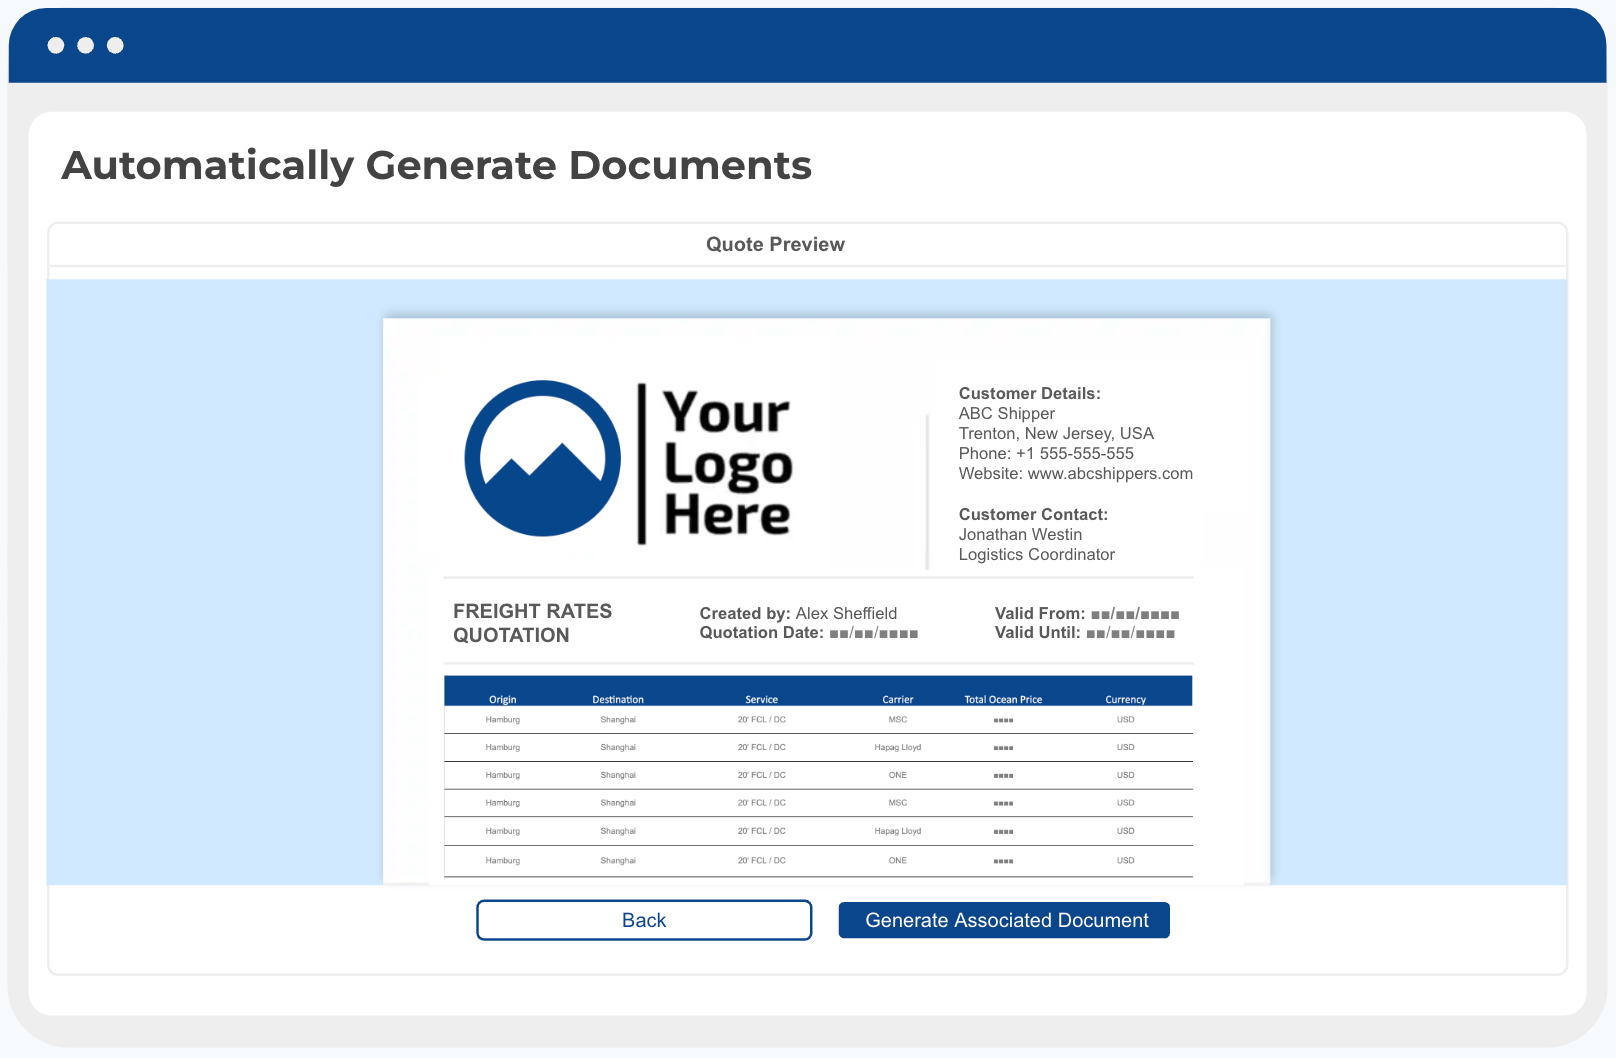 Automatically Generate Documents